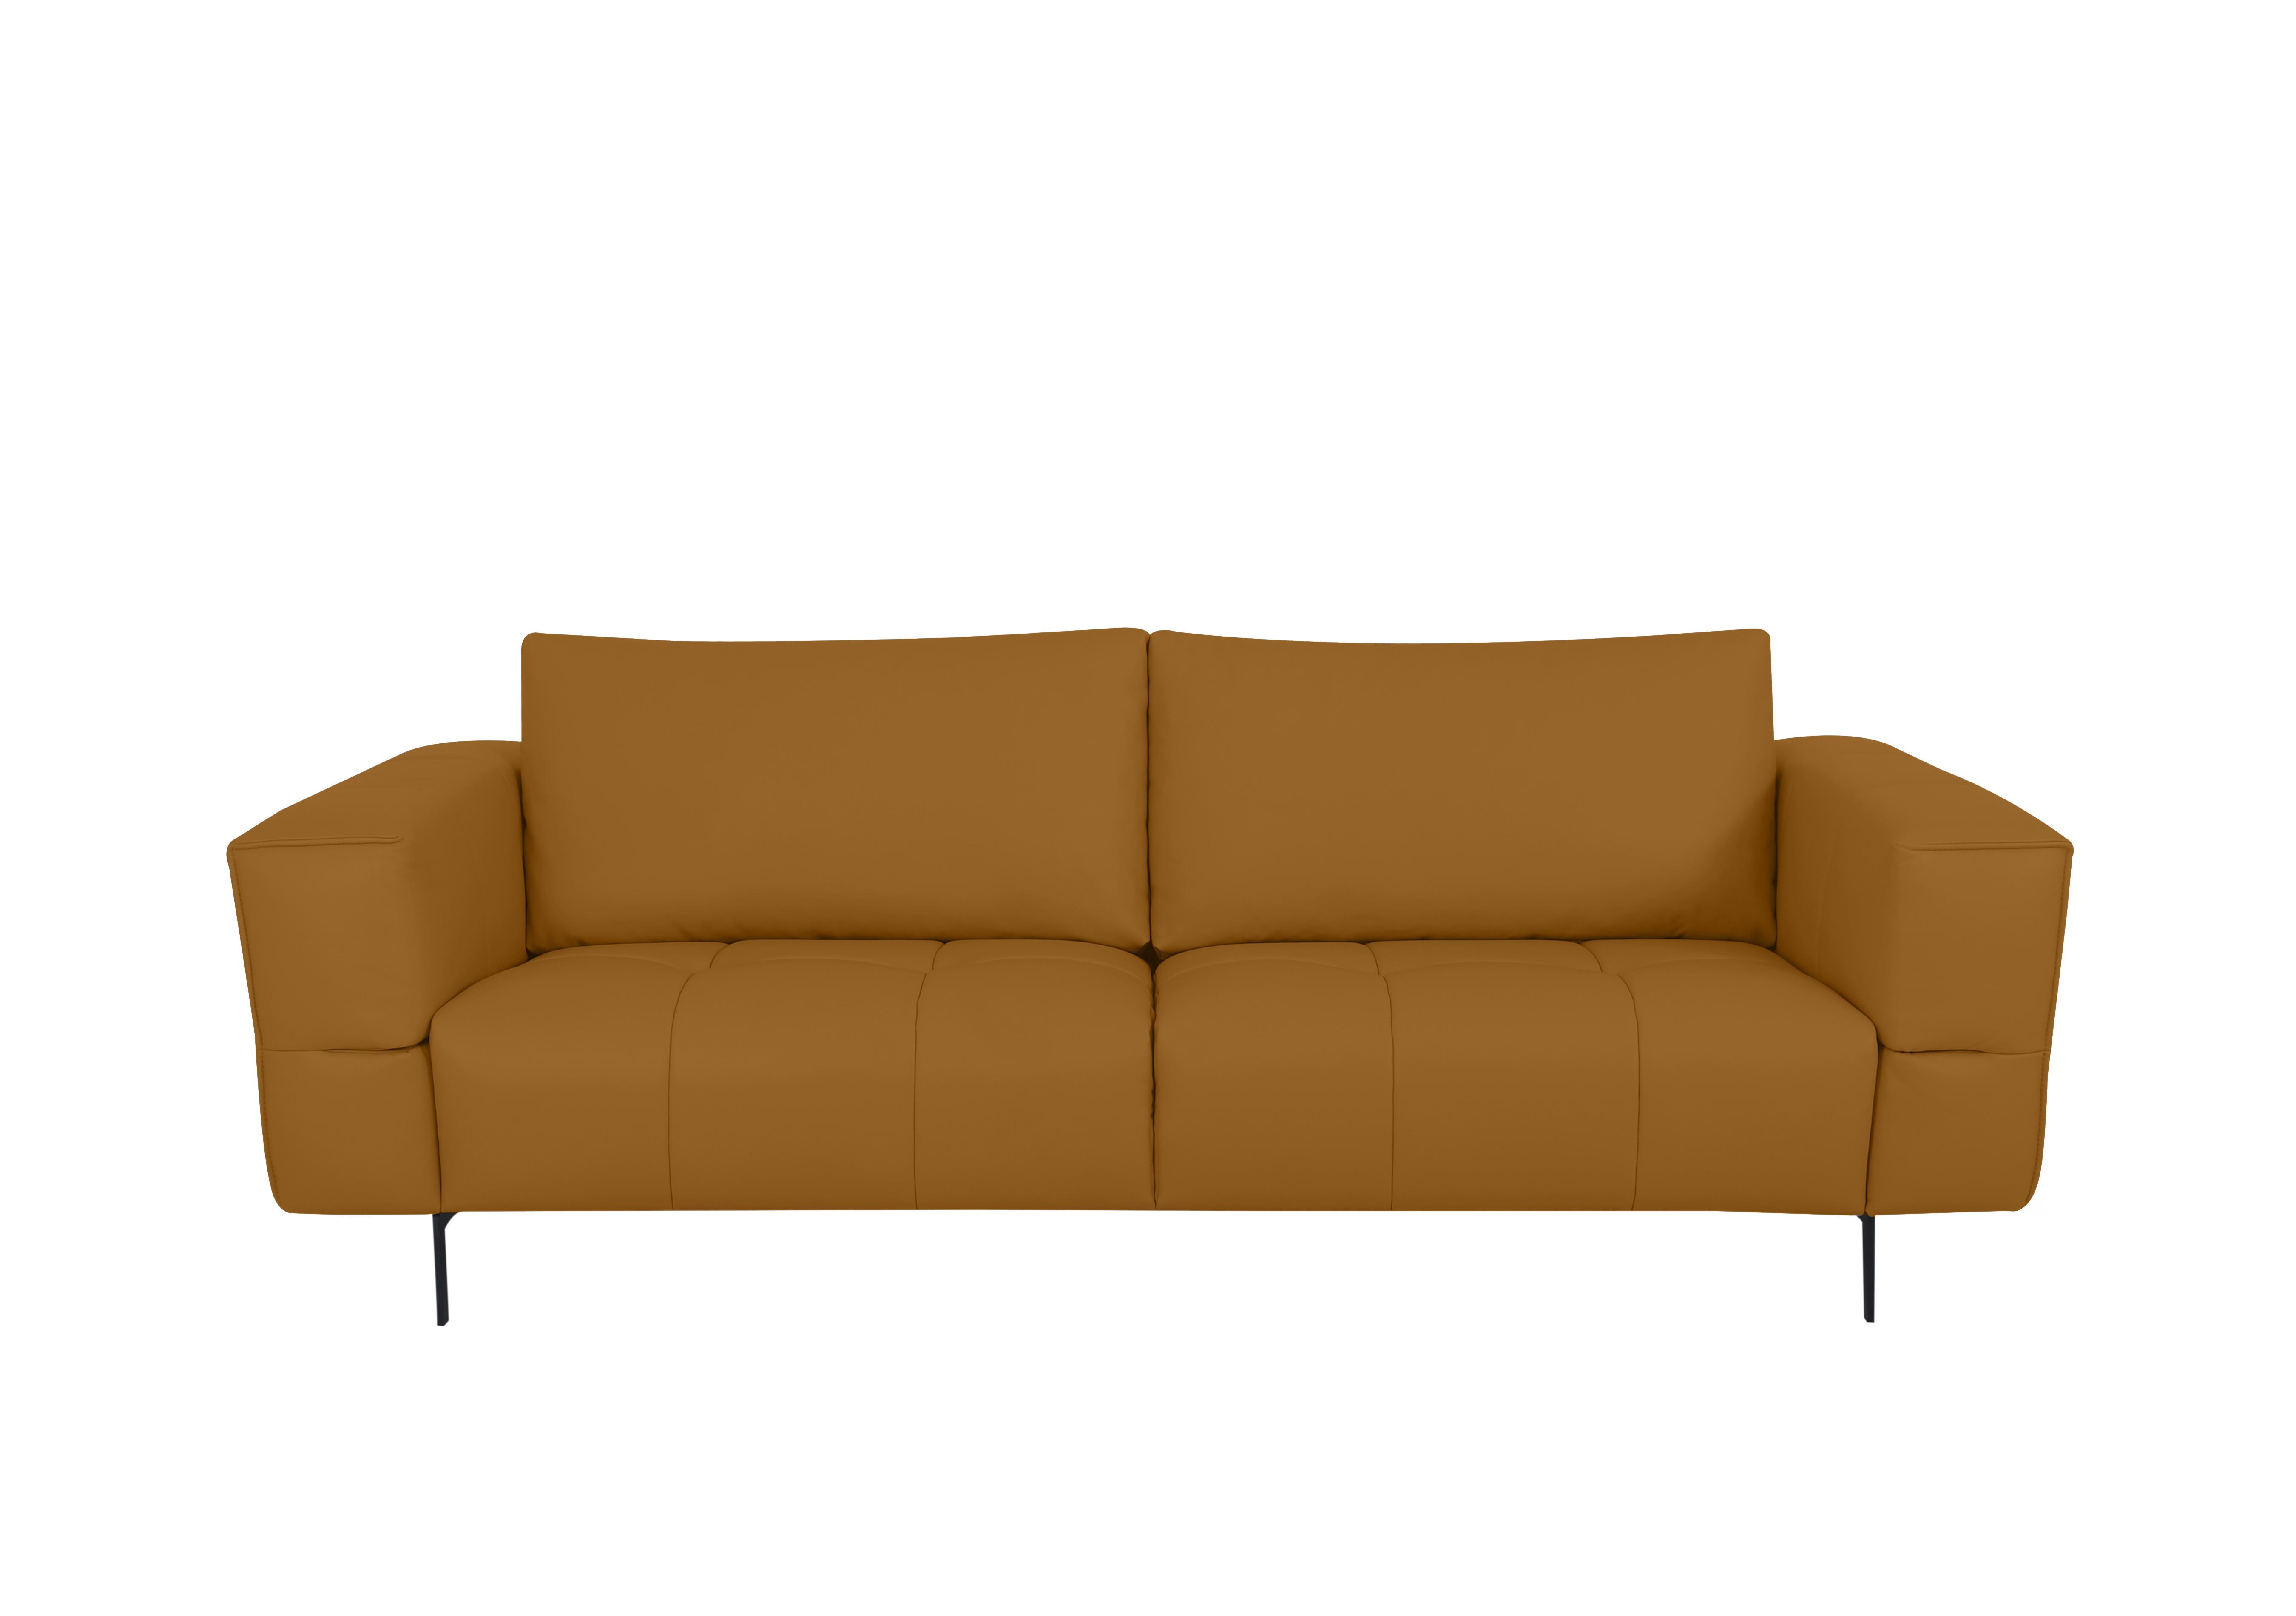 Lawson 3 Seater Leather Sofa in Np-606e Honey Yellow on Furniture Village